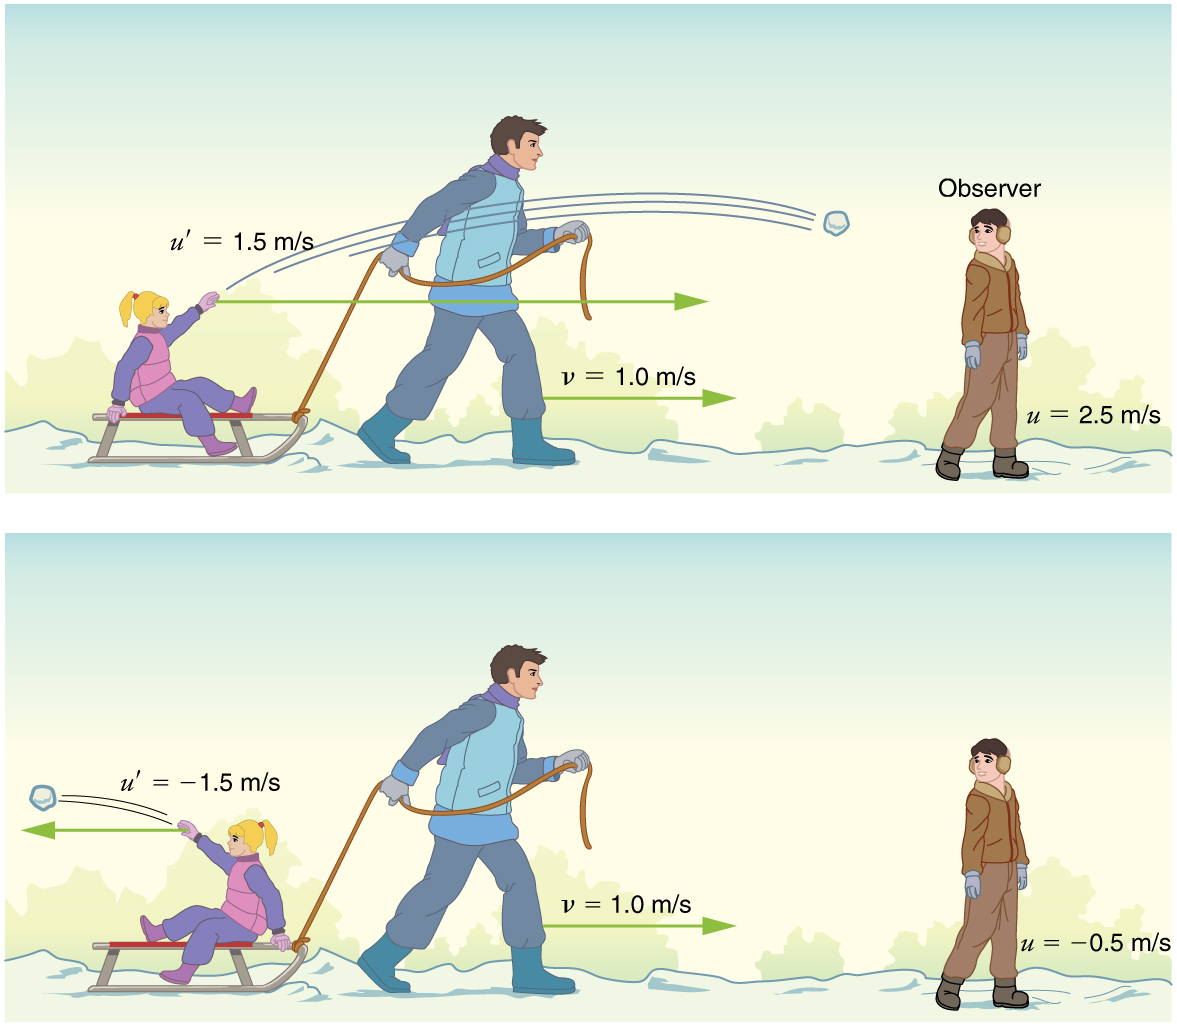 In part a, a man is pulling a sled towards the right with a velocity v equals one point zero meters per second. A girl sitting on the sled facing forward throws a snowball toward a boy on the far right of the picture. The snowball is labeled u primed equals one point five meters per second in the direction the sled is being pulled. The boy is labelled two point five meters per second. In figure b, a similar figure is shown, but the man’s velocity is one point zero meters per second, the girl is facing backward and throwing the snowball behind the sled. The snowball is labelled u primed equals negative one point five meters per second, and the boy is labelled u equals negative zero point five meters per second.